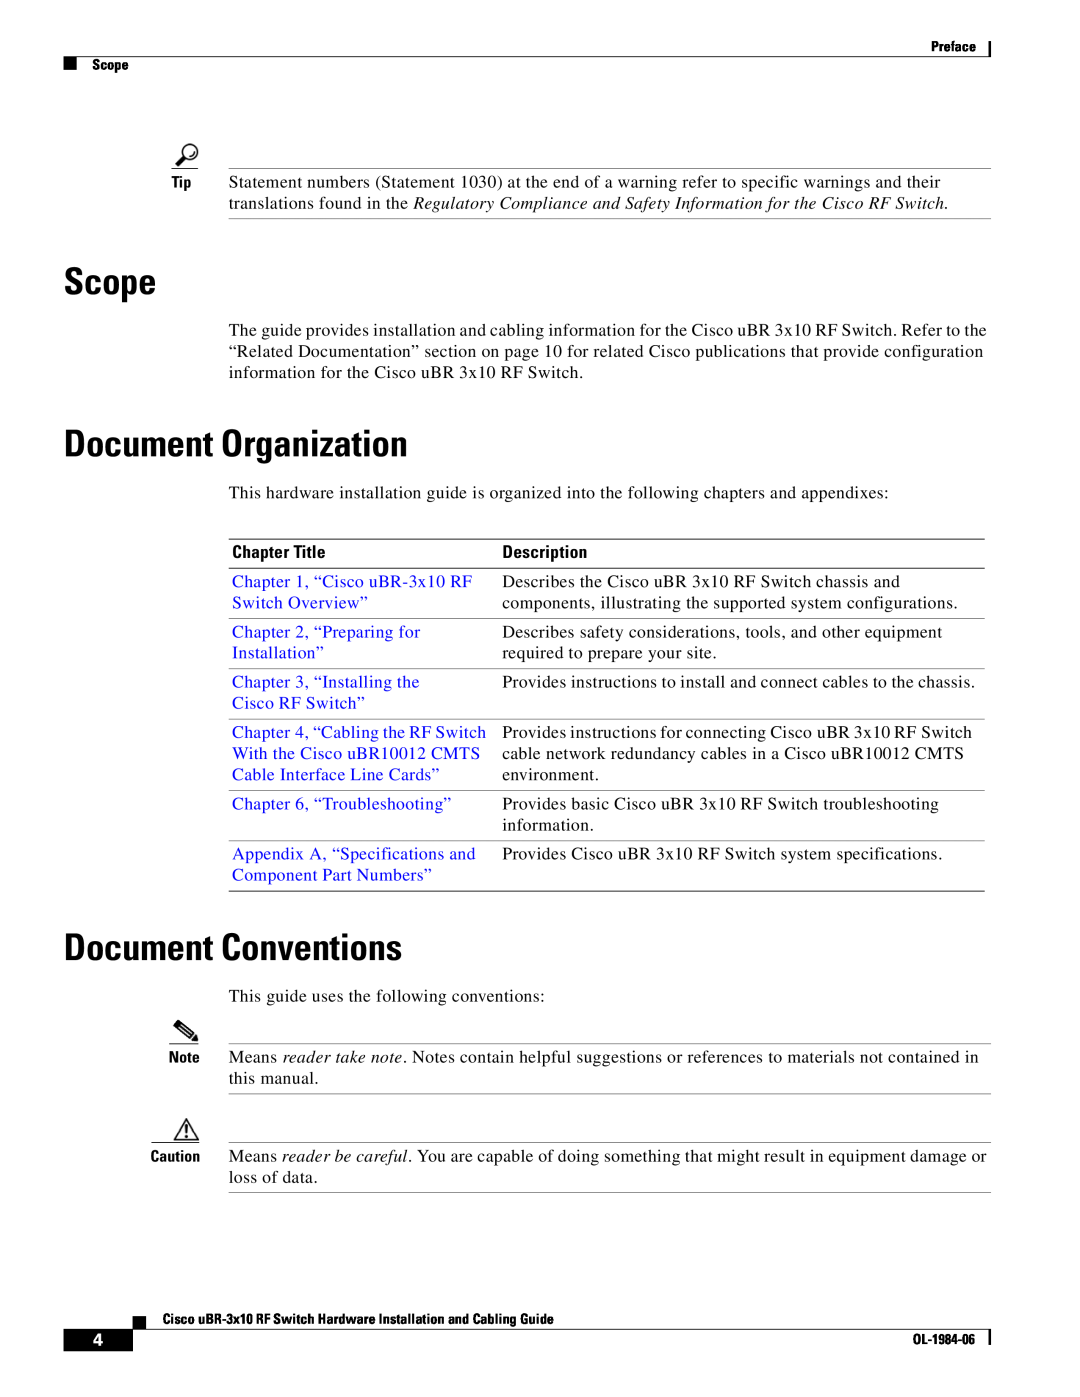 Cisco Systems UBR-3X10 manual Scope, Document Organization, Document Conventions, “Cisco uBR-3x10 RF, Switch Overview” 